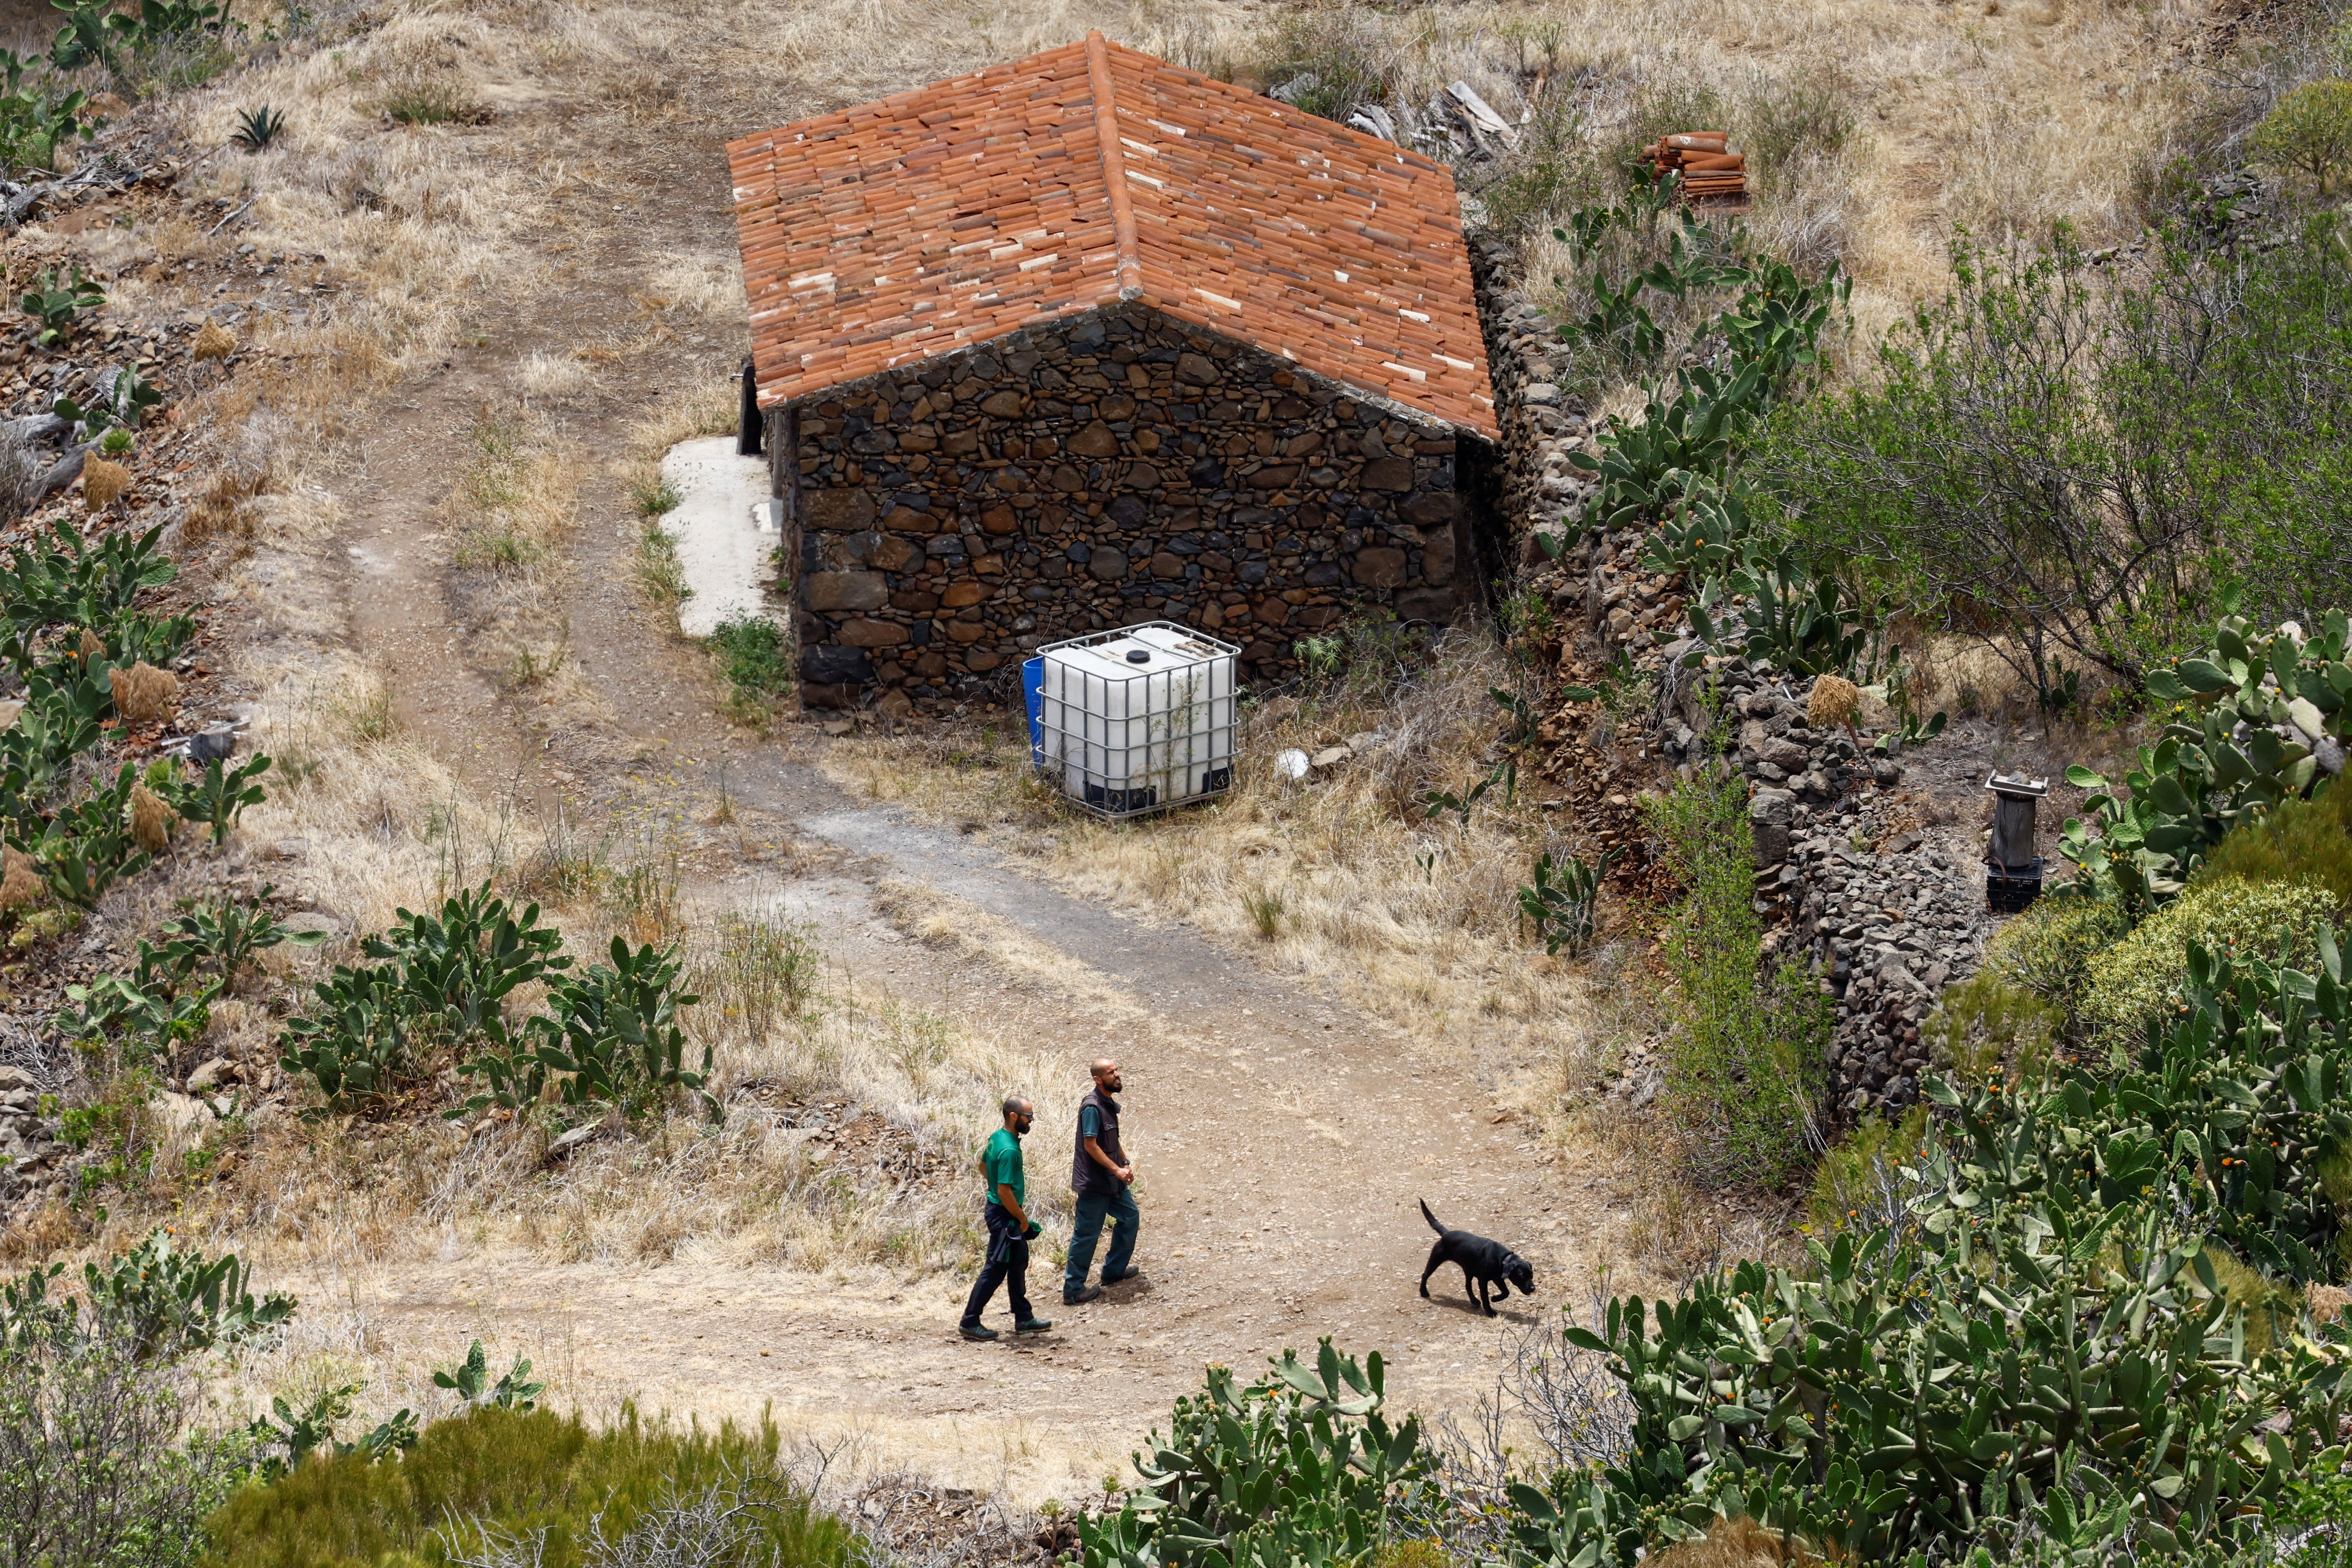 Guardia Civil officers use a dog to search for Jay Slater in the Masca ravine